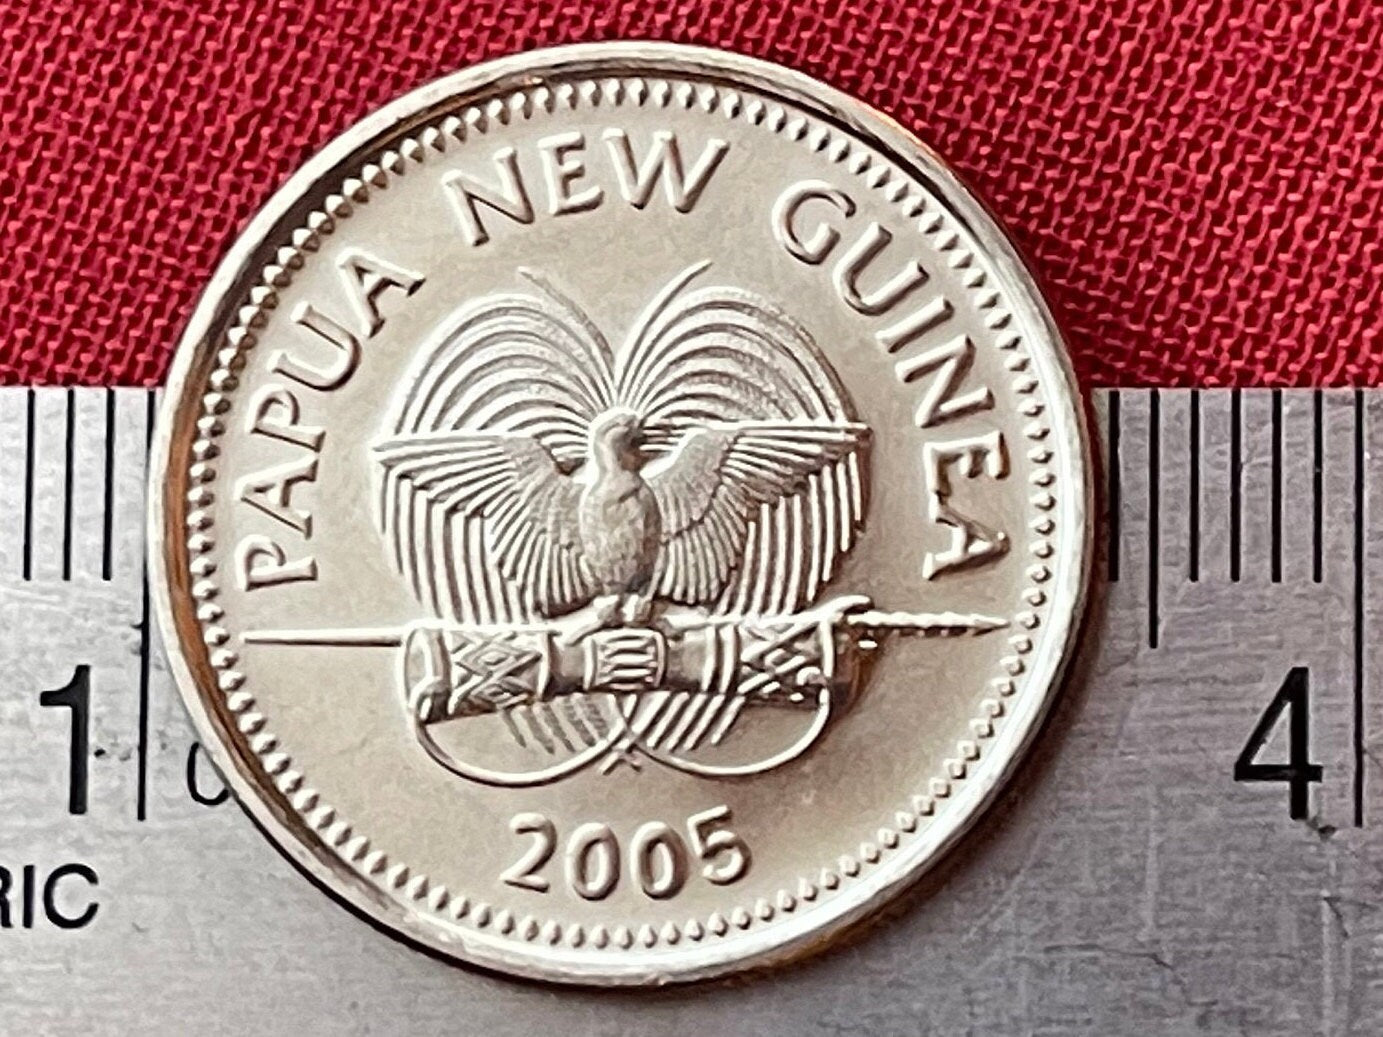 Common Spotted Cuscus & Bird of Paradise 10 Toea Papua New Guinea Authentic Coin Money for Jewelry and Craft Making